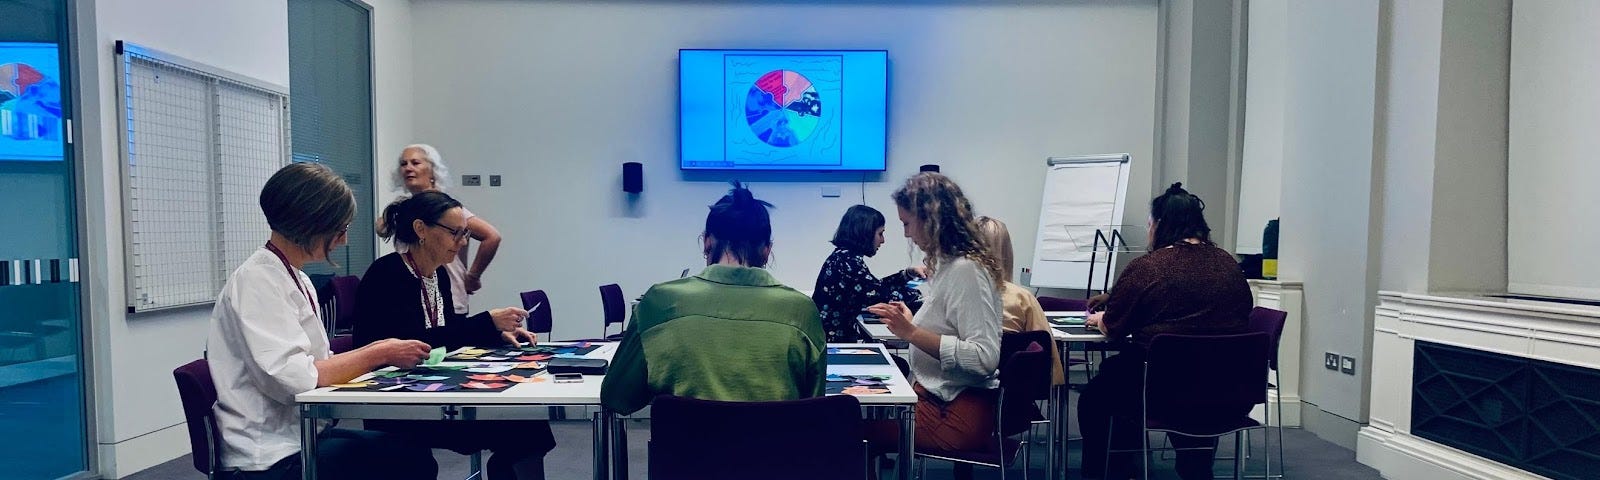 Seven participants sitting around white tables with archive materials and contributing in the Shaping Narratives Workshop at Wellcome Collection.